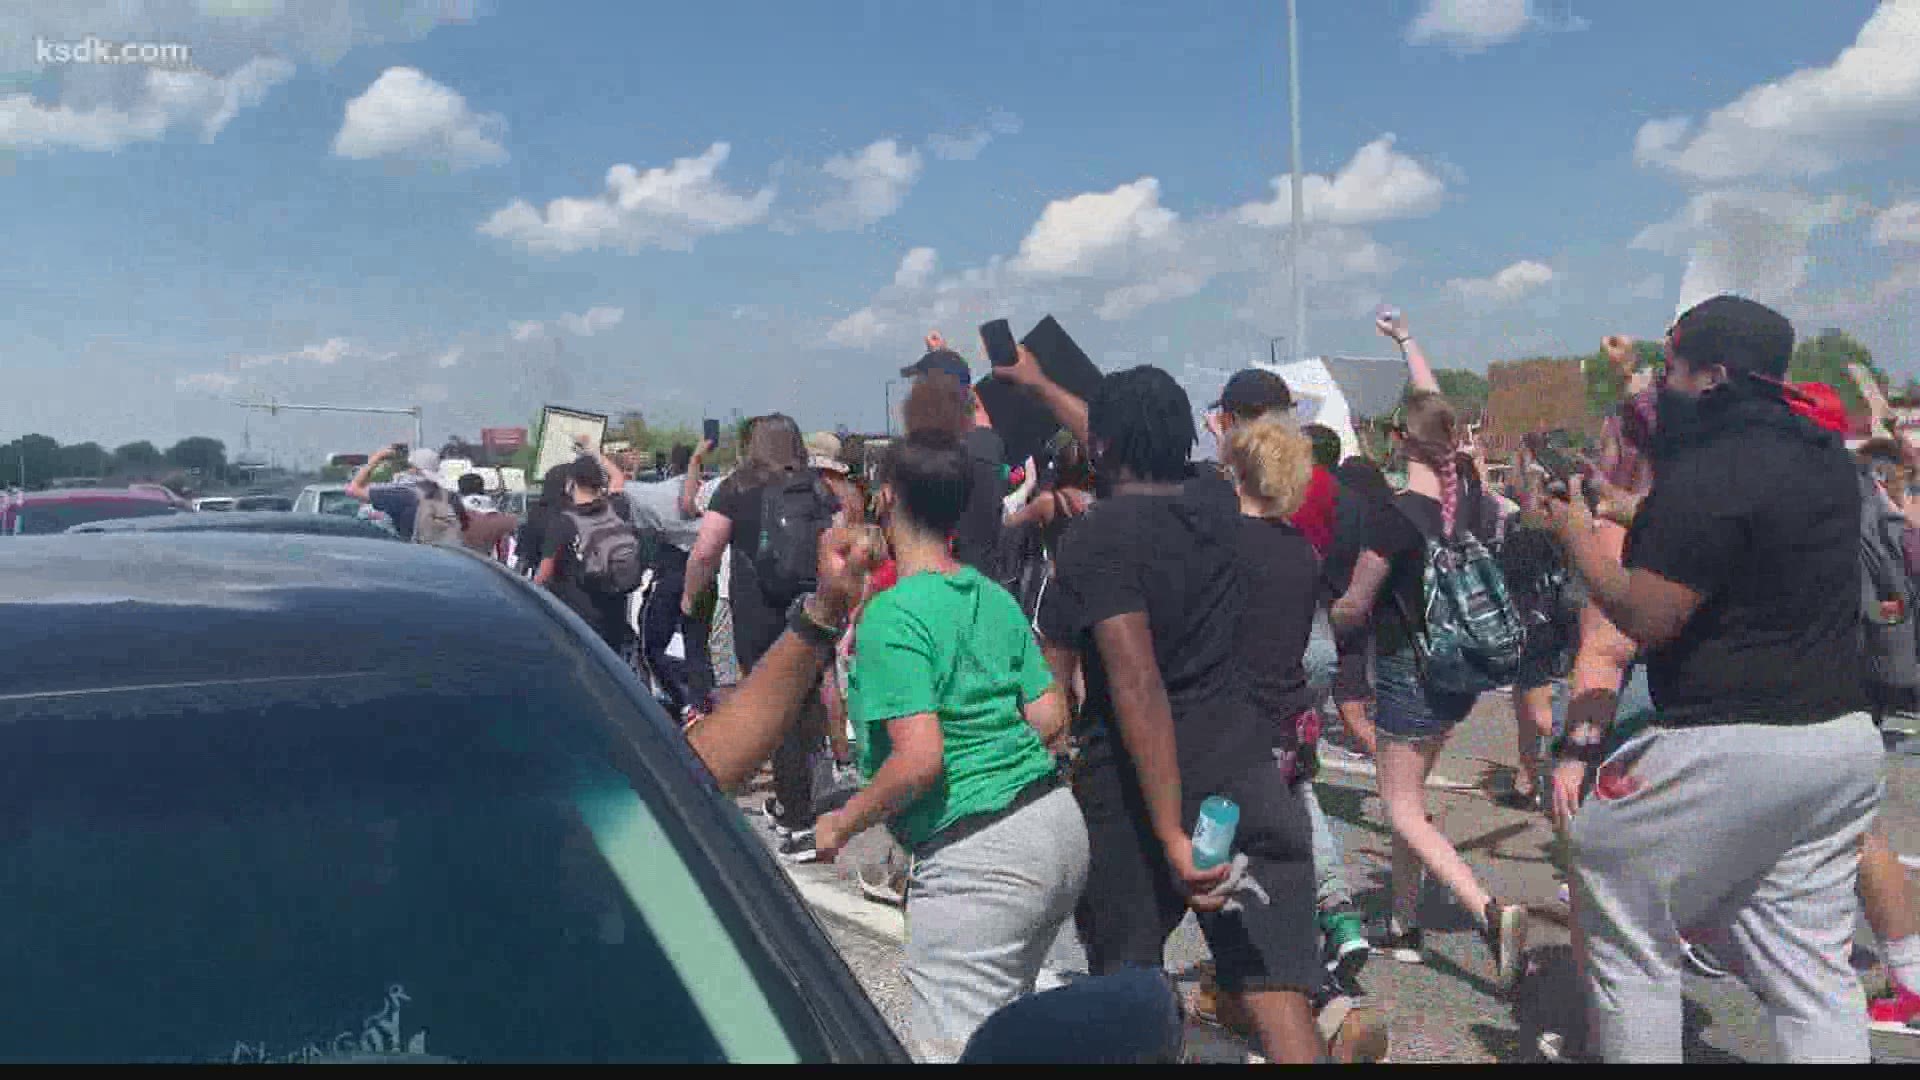 Protests are continuing to commence around the St. Louis area after the death of George Floyd in Minneapolis.